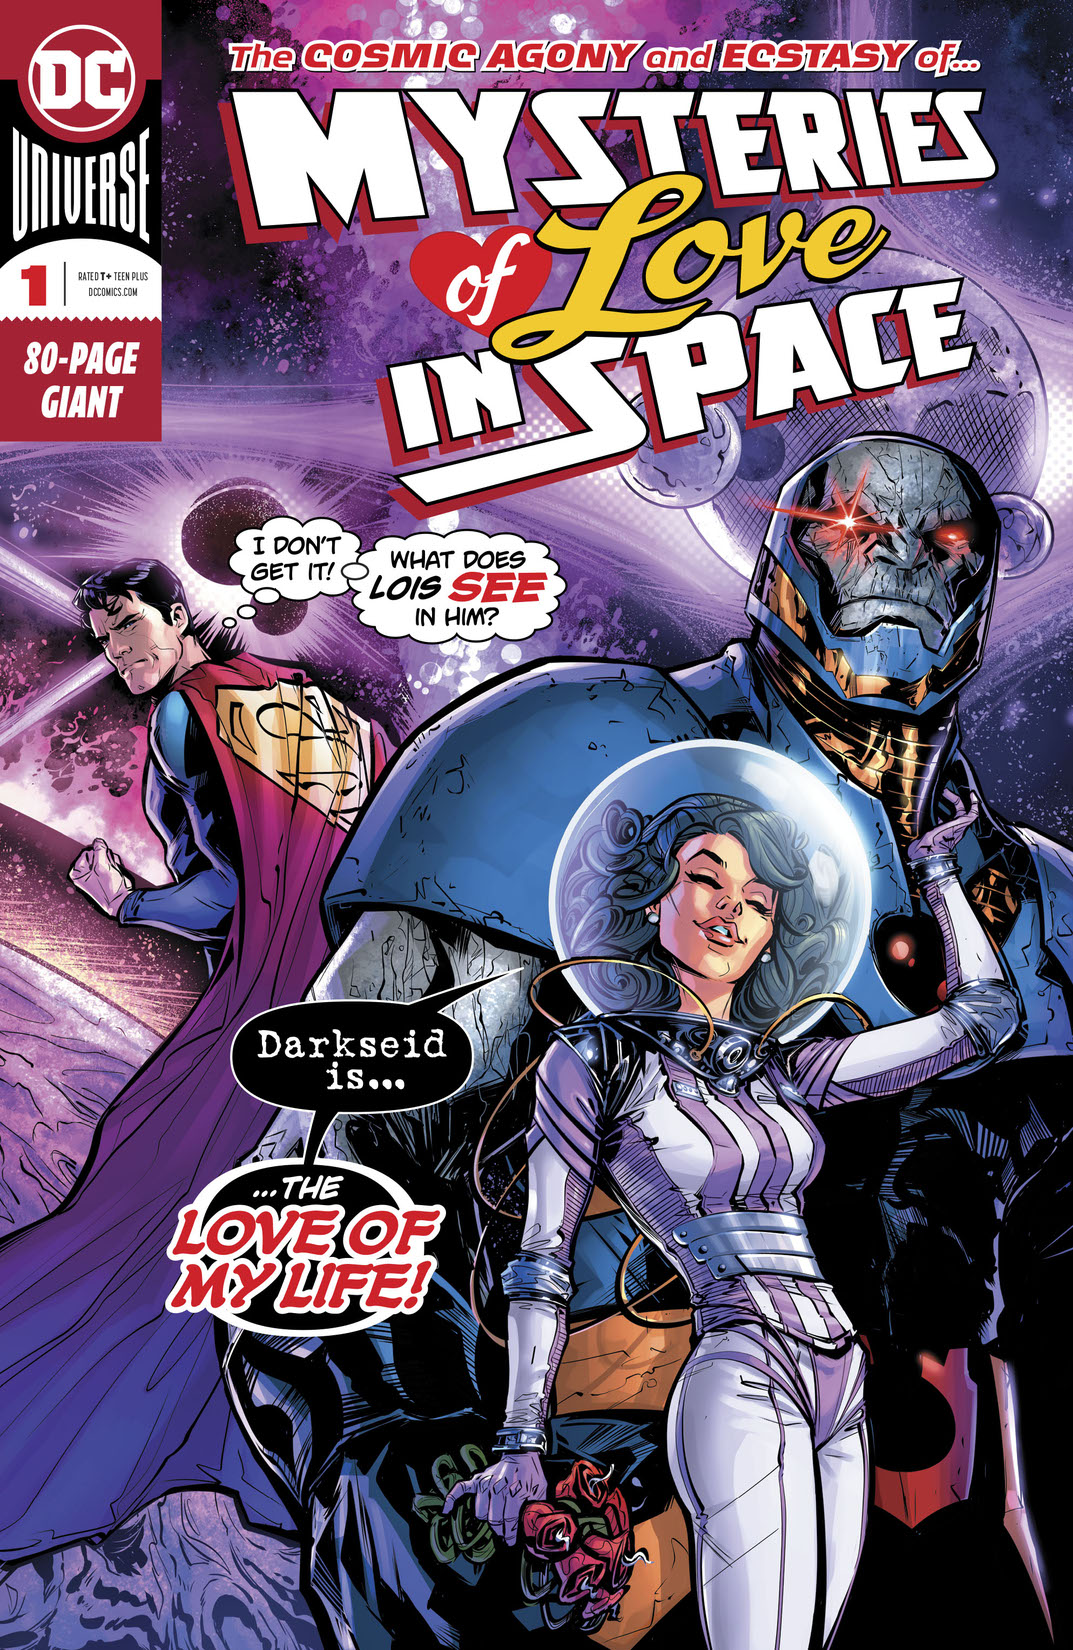 Mysteries of Love in Space #1 preview images